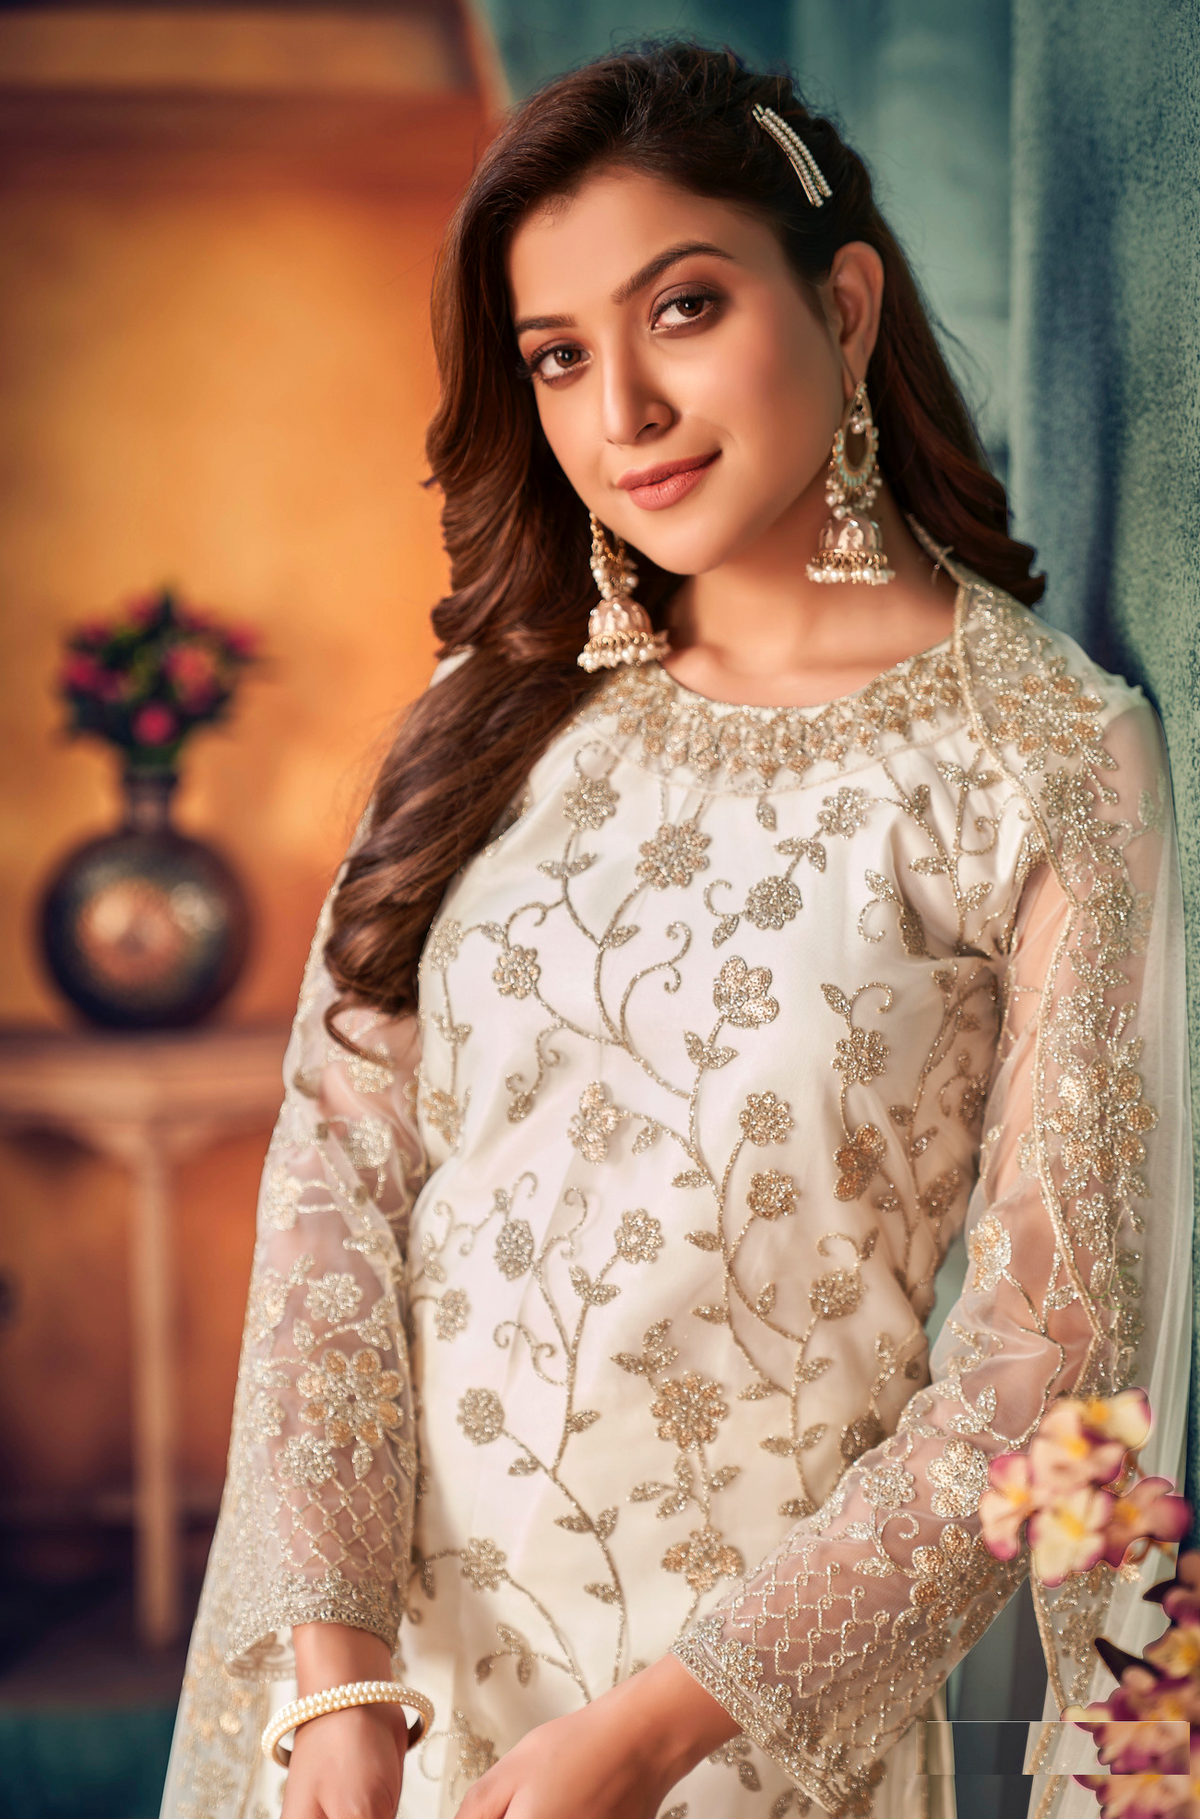 Embroidered Net Pakistani Suit in Off White